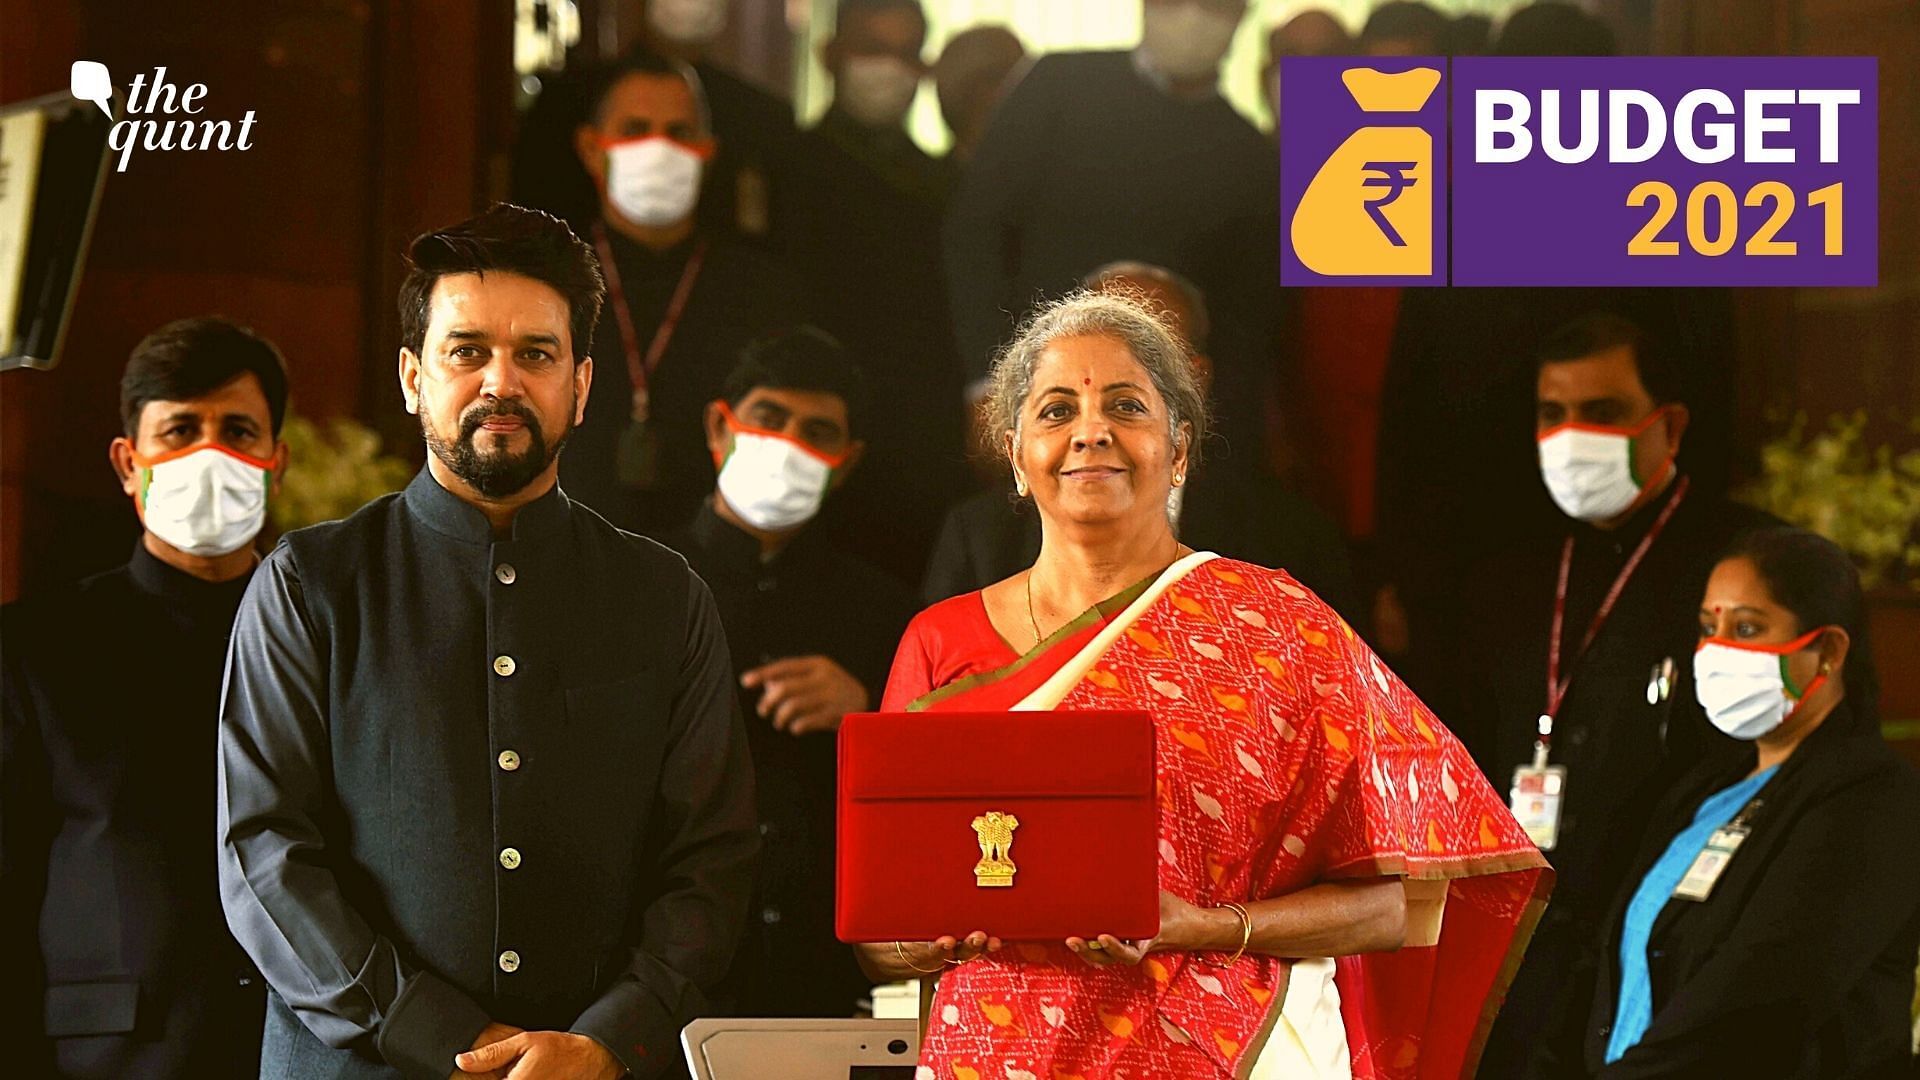 Finance Minister Nirmala Sitharaman replaced the Swadeshi bahi khata with a Made in India tablet ahead of the Union Budget 2021.